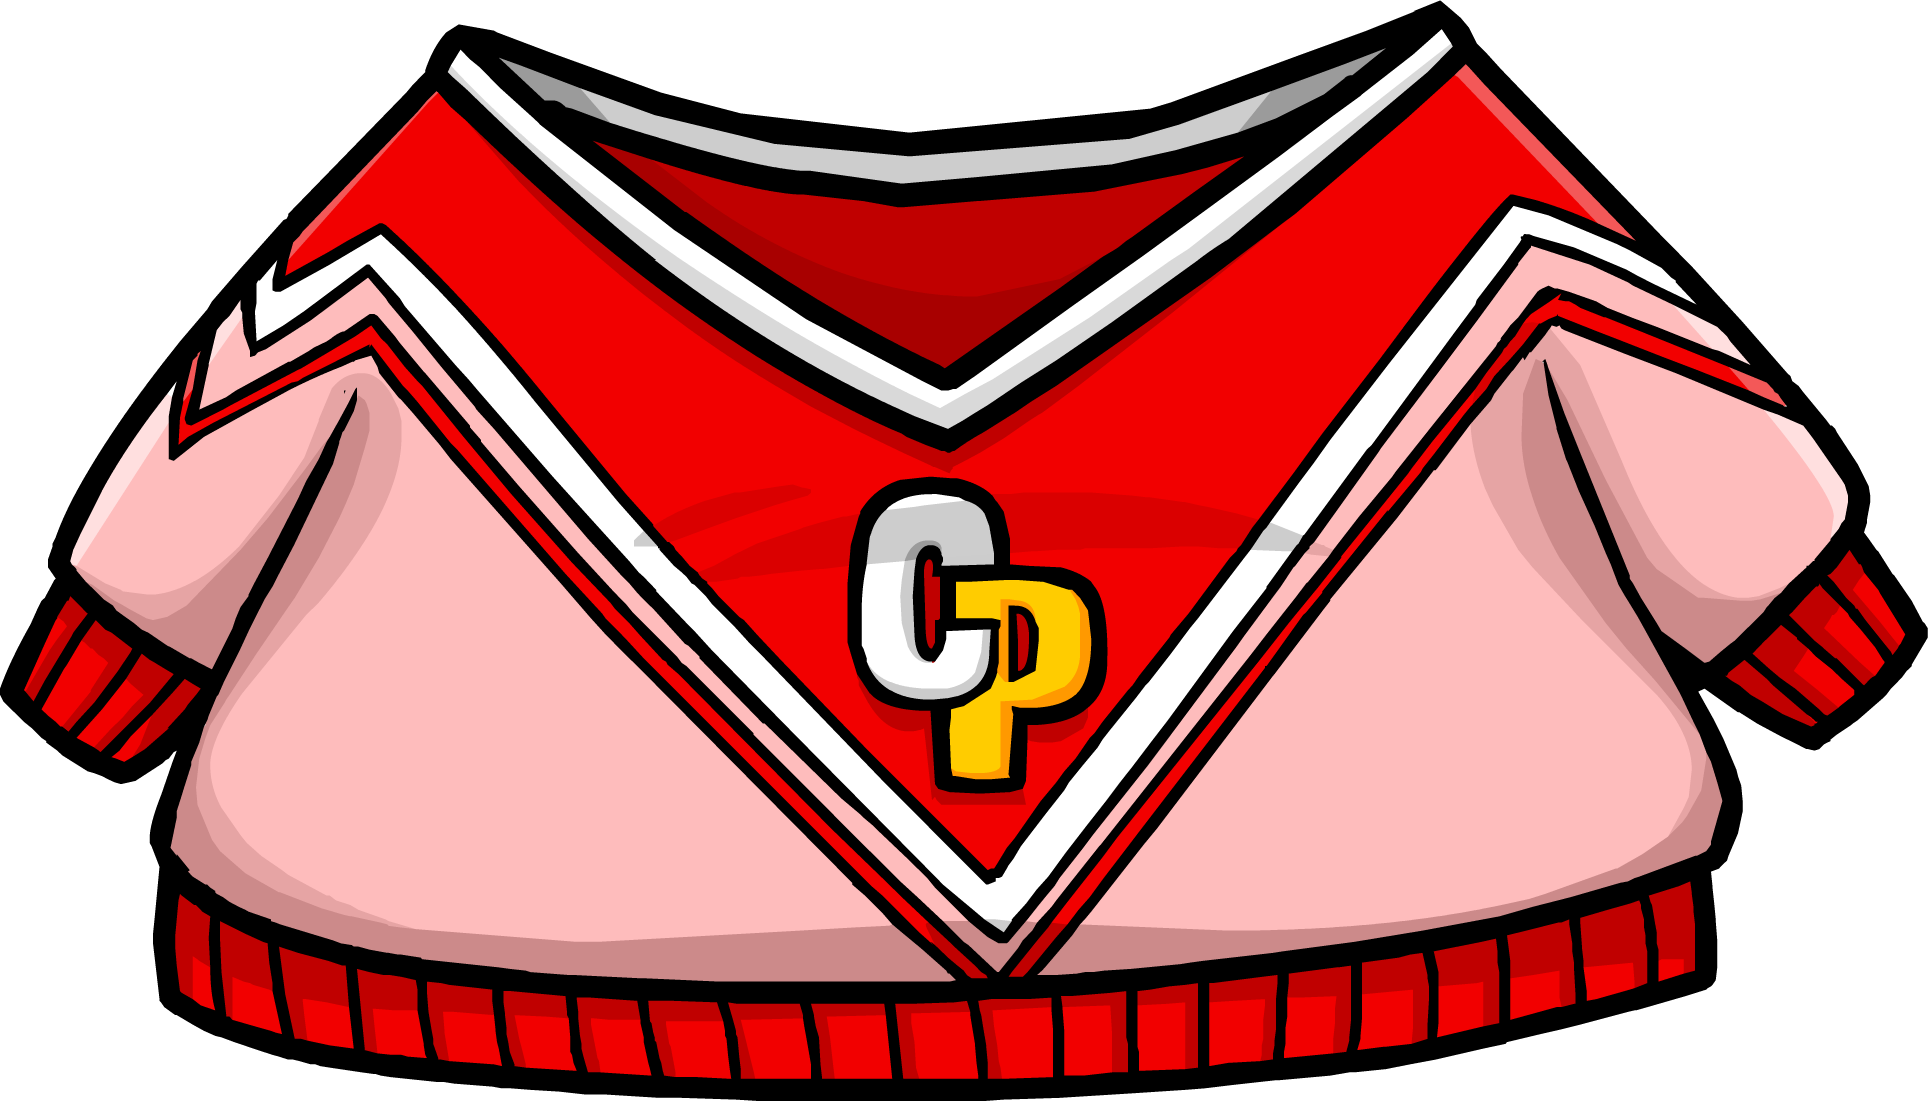 Red Cheerleading Sweater Clothing Icon Id 4003 - Club Penguin Blue Cheerleader Sweater (1928x1101)